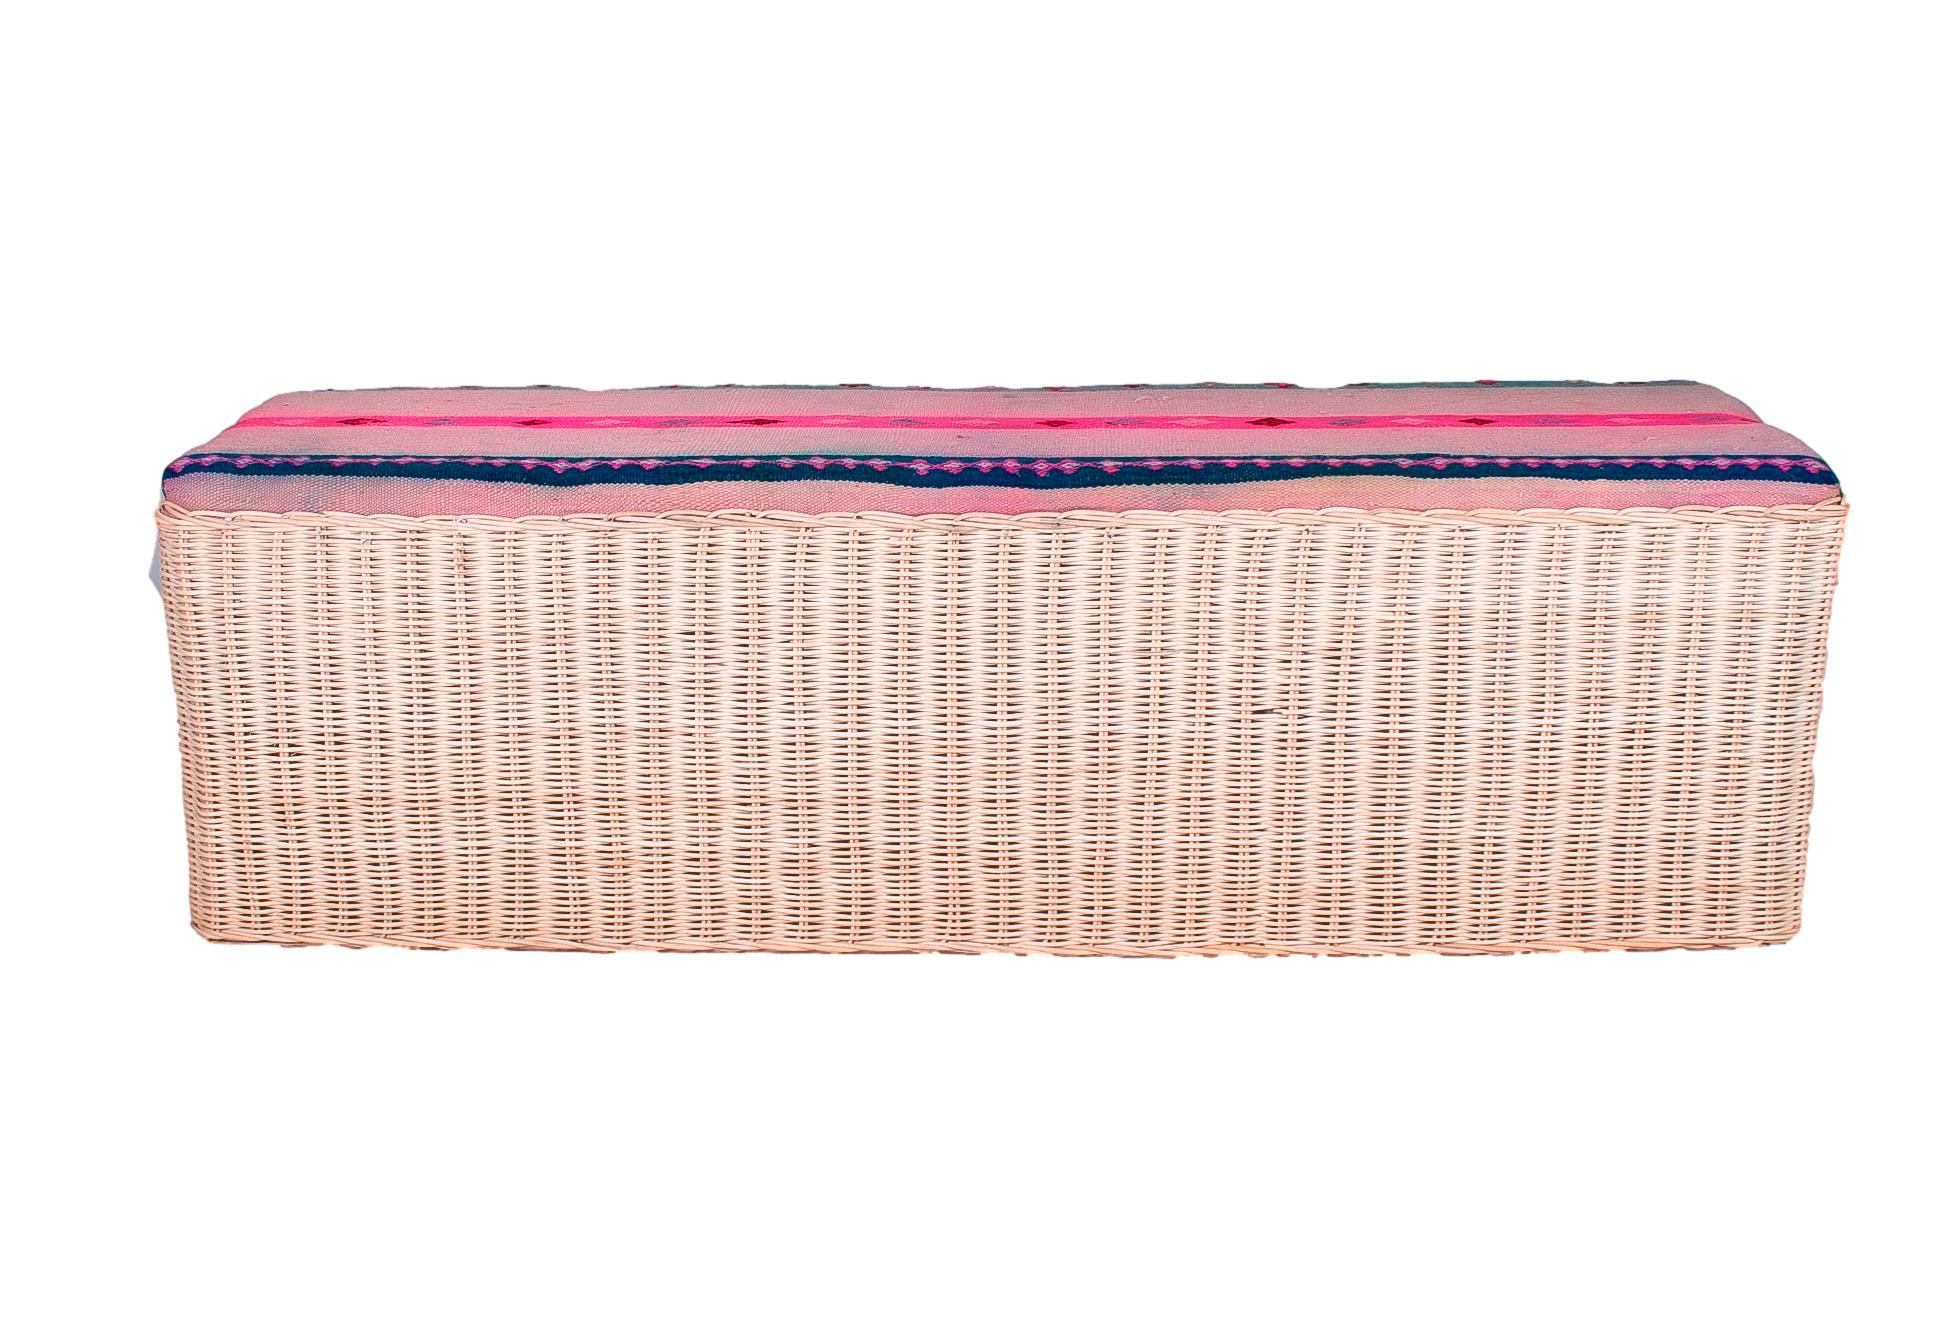 Spanish hand woven wicker bench with fabric upholstered seat.